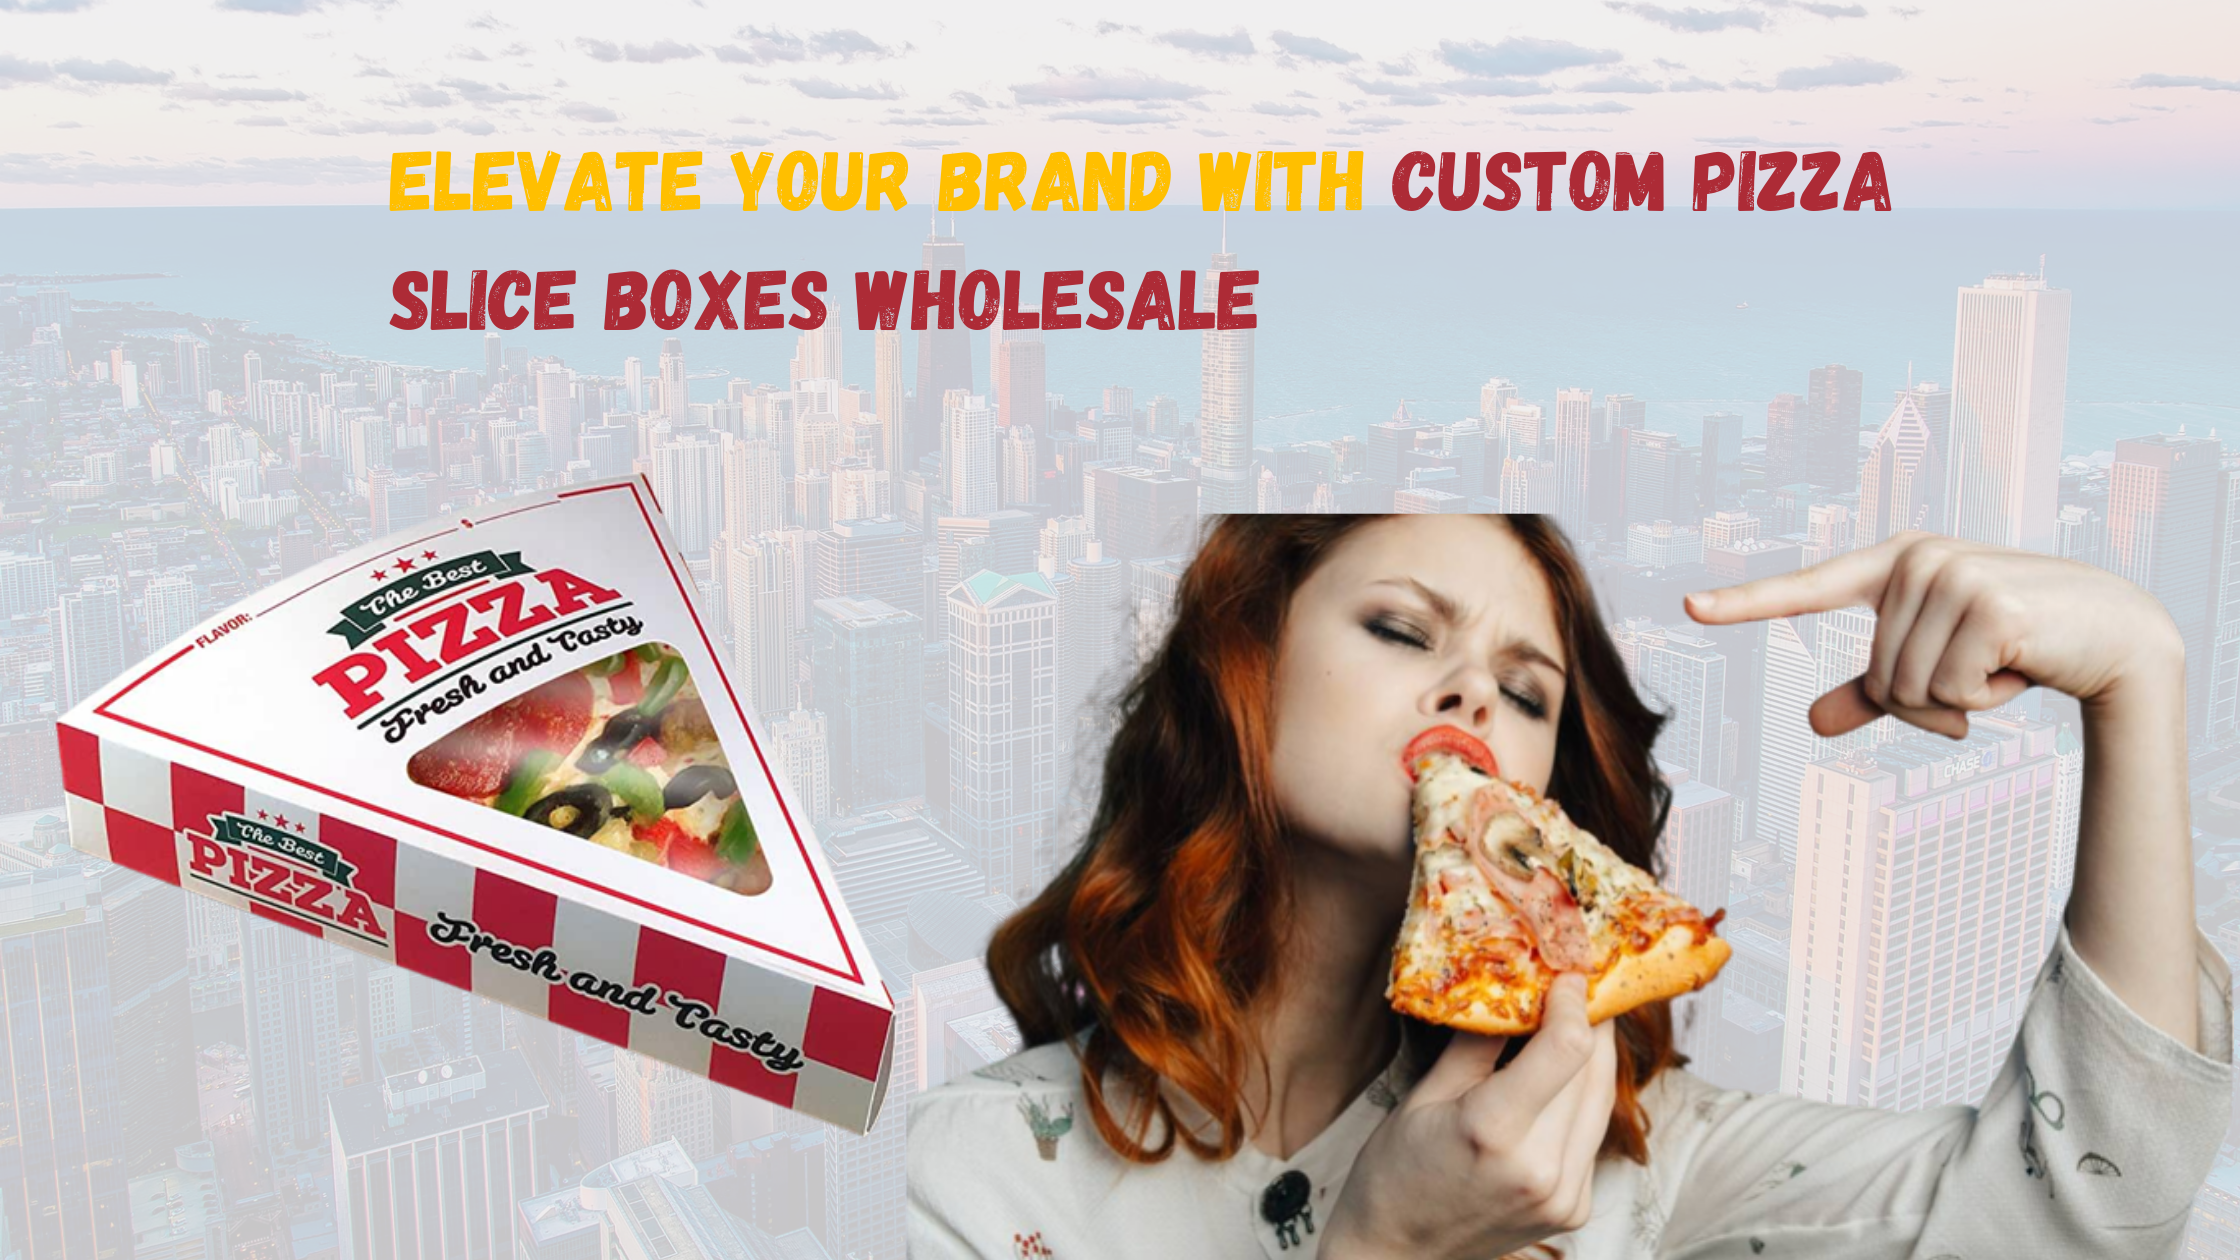 Elevate Your Brand with Custom Pizza Slice Boxes Wholesale